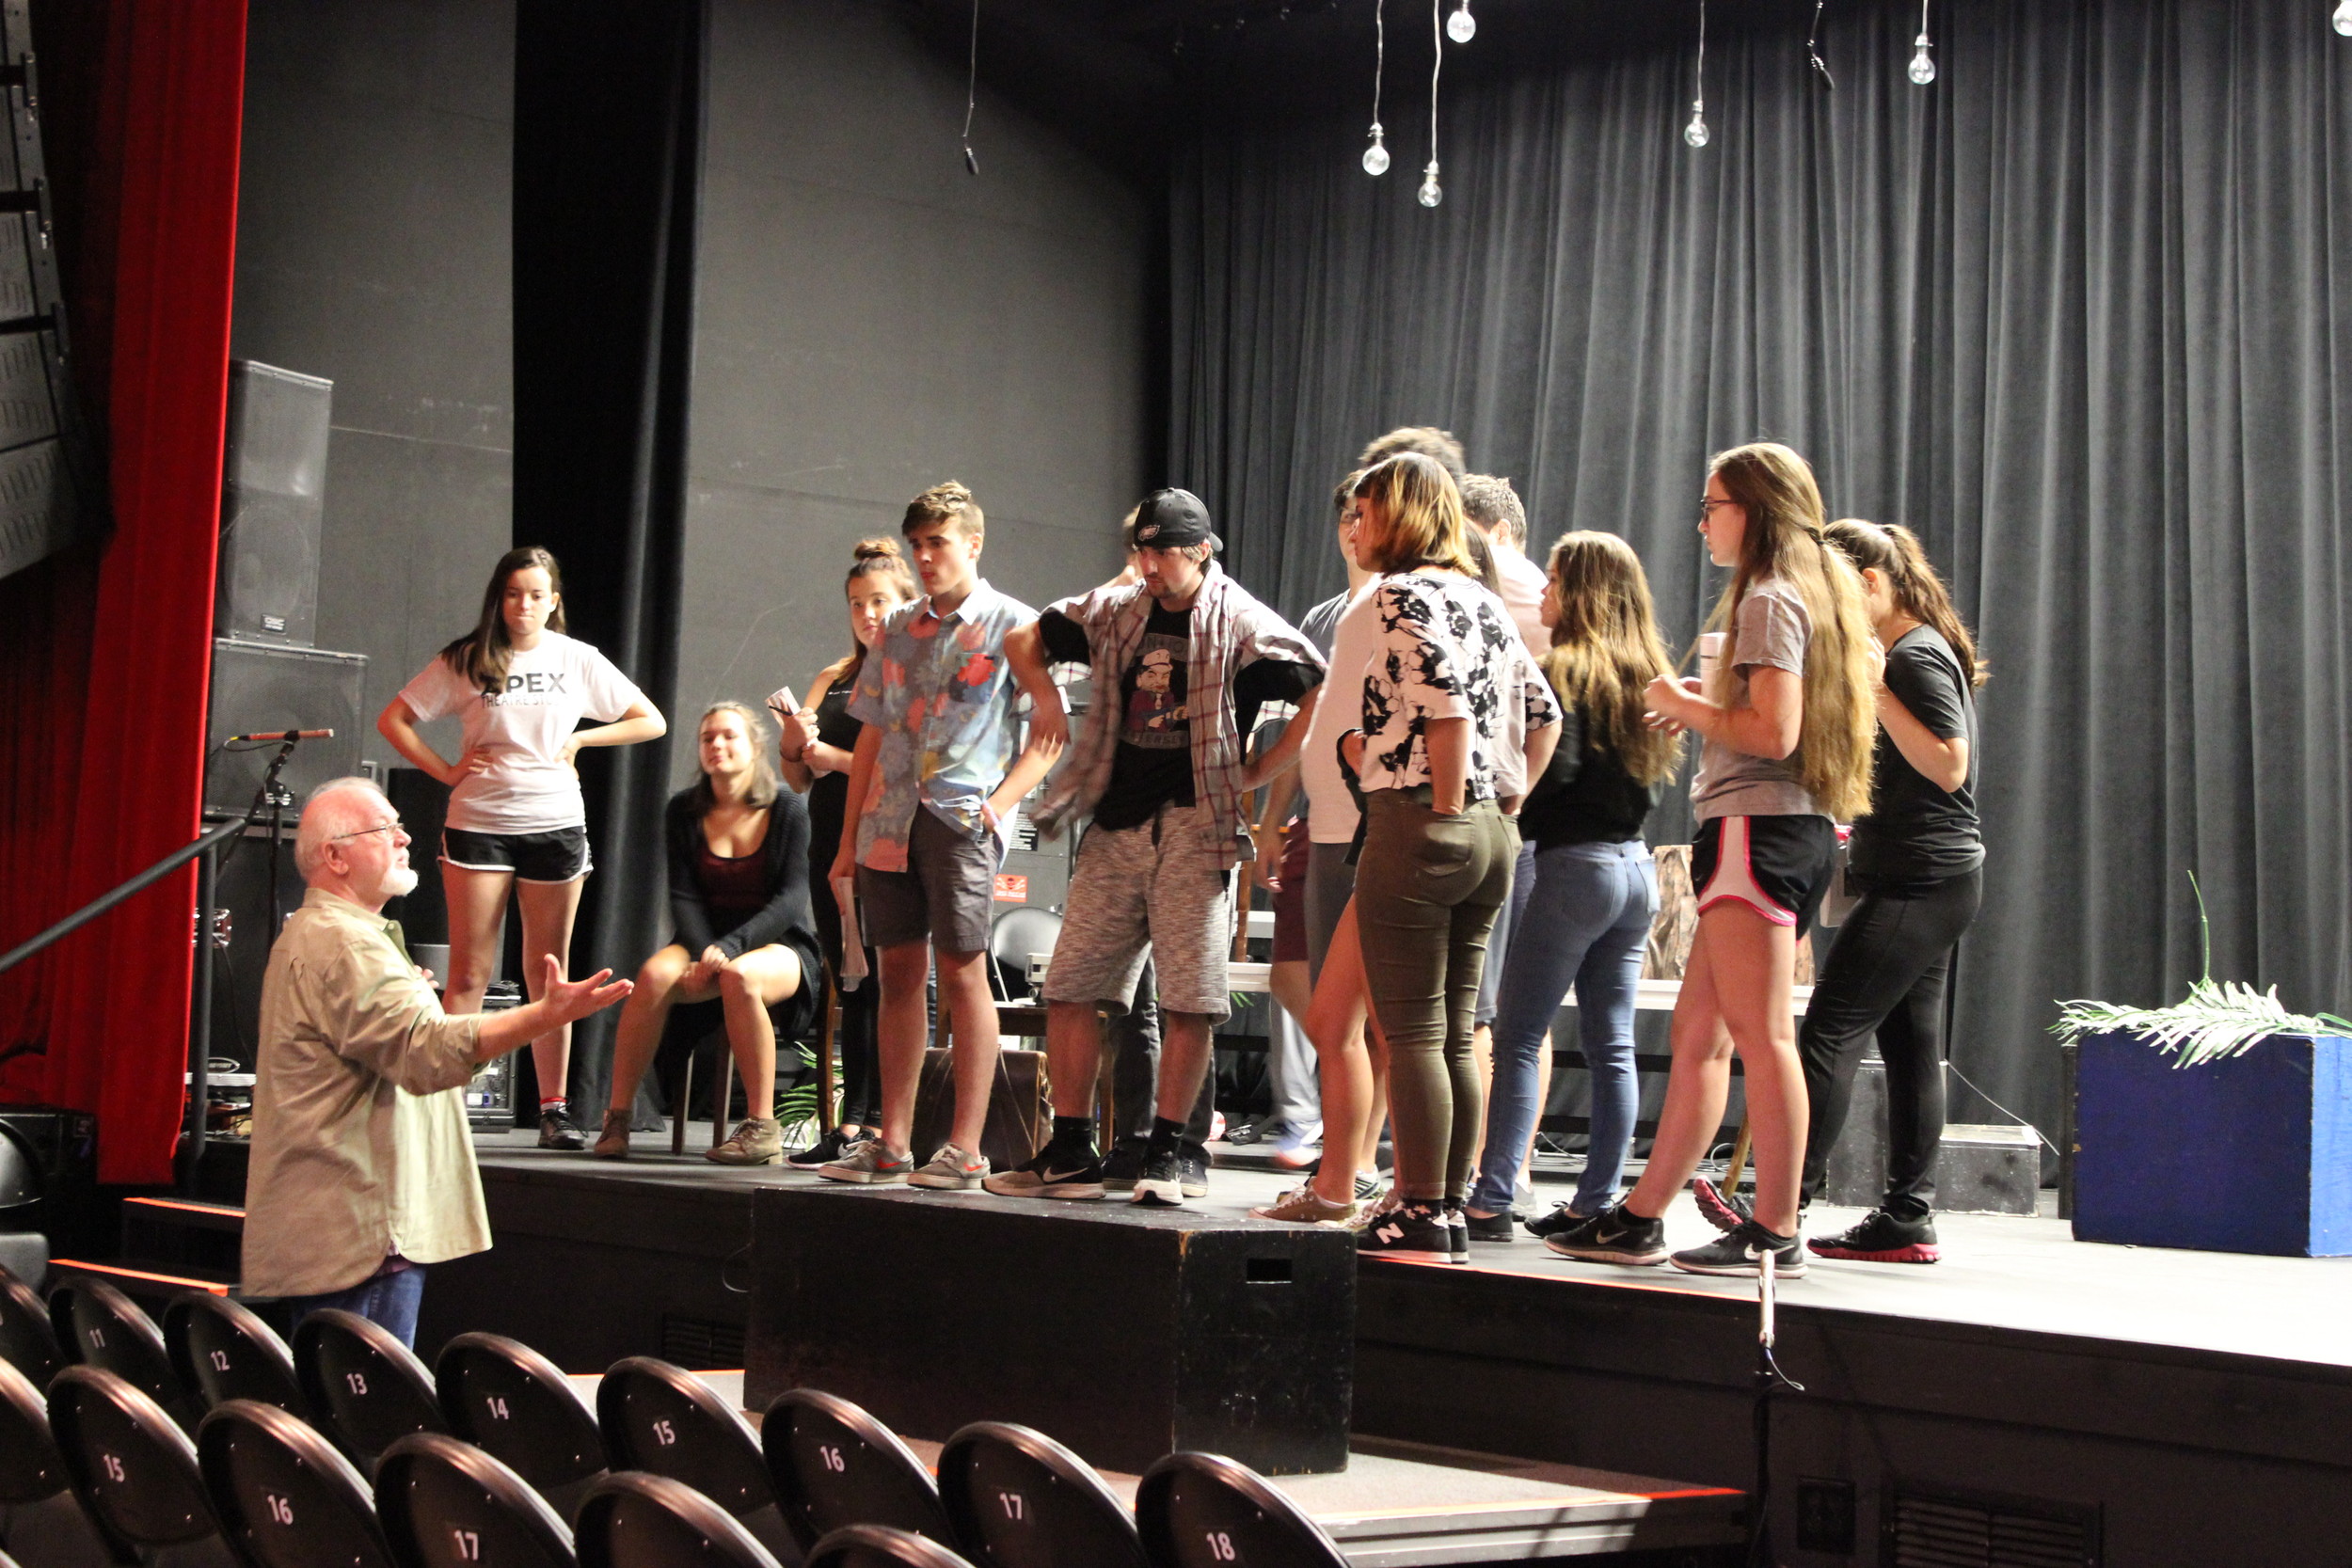 Director George E. Judy and the cast of “Into the Woods” at the June 16 rehearsal